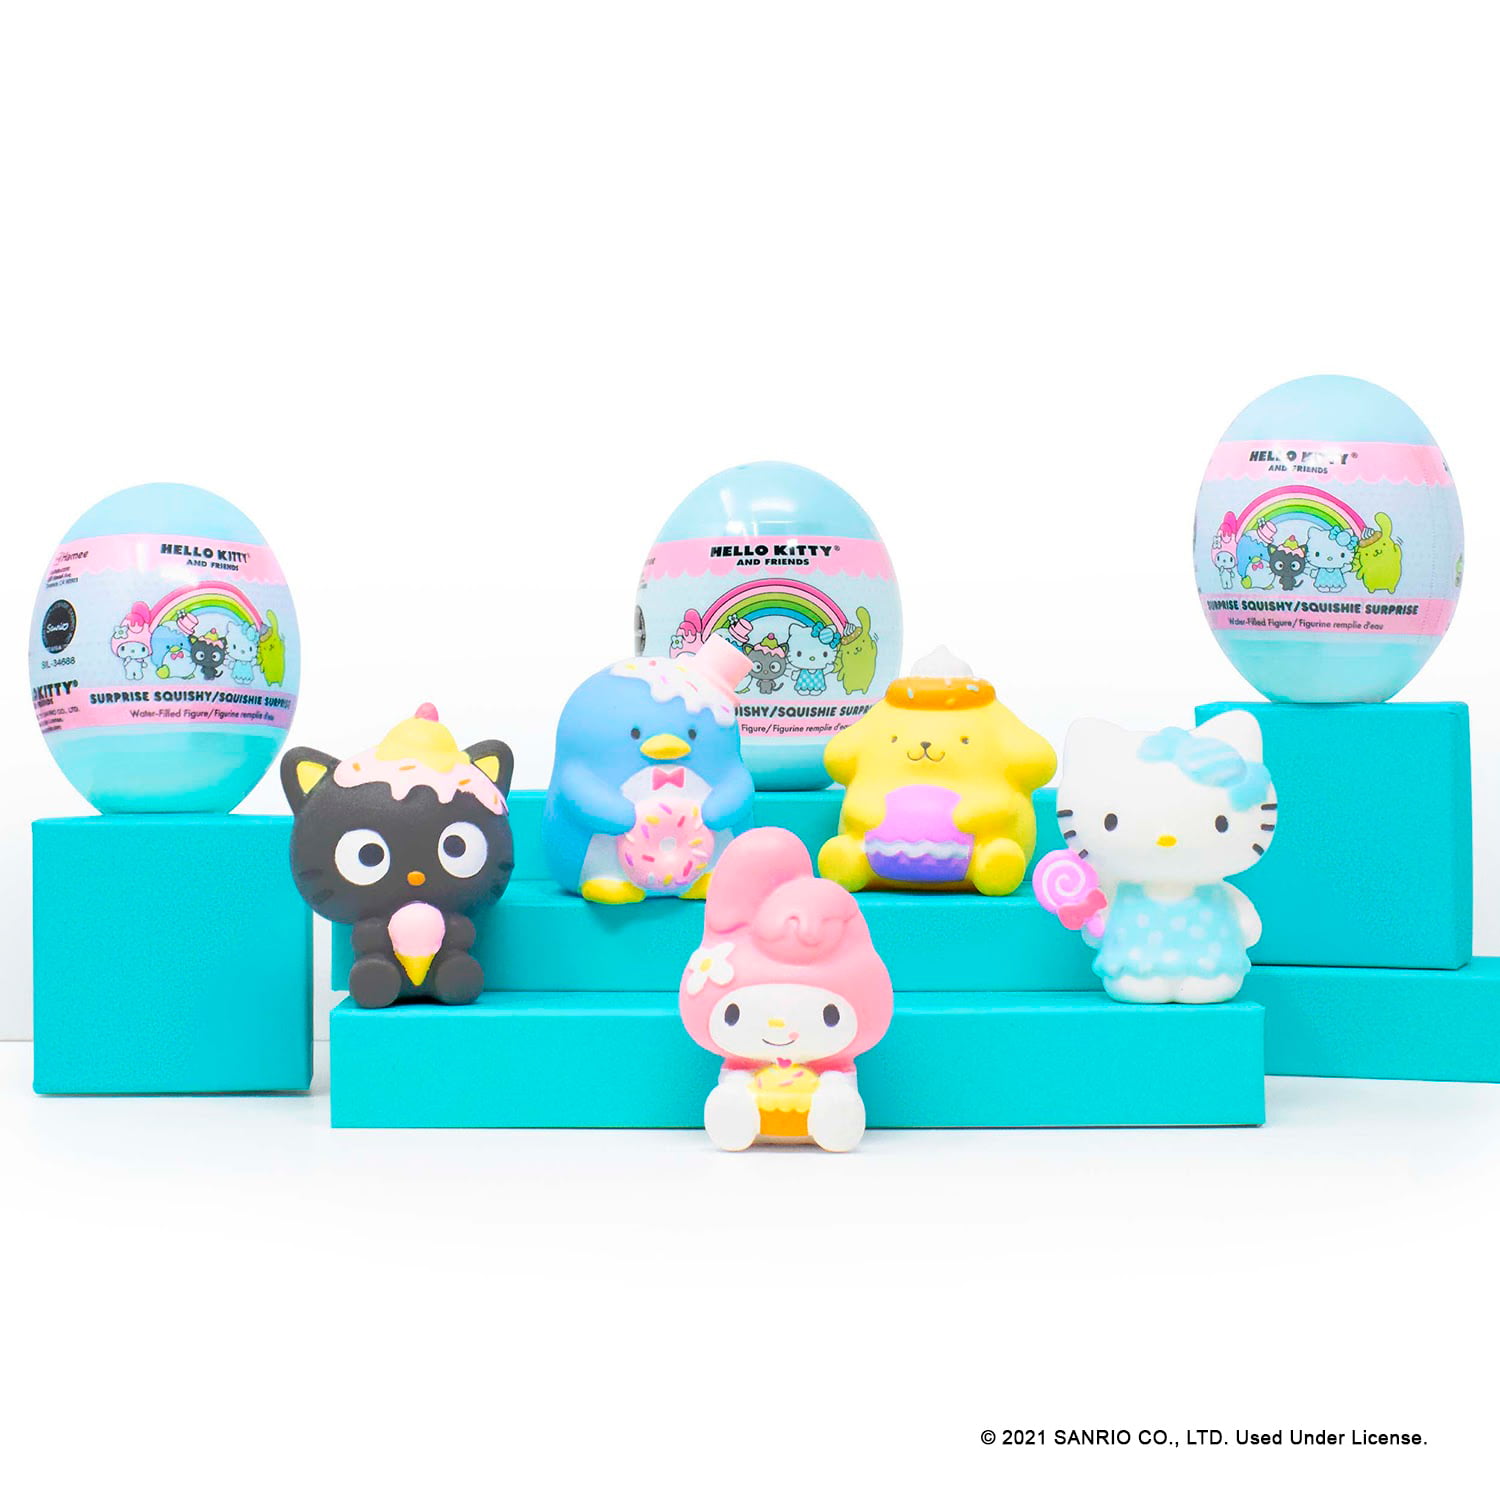 Hamee Squishies (Sanrio Series Blind Pick) Water Filled Mystery Capsule Squishy Toy for Boys Girls Children Adults - Walmart.com